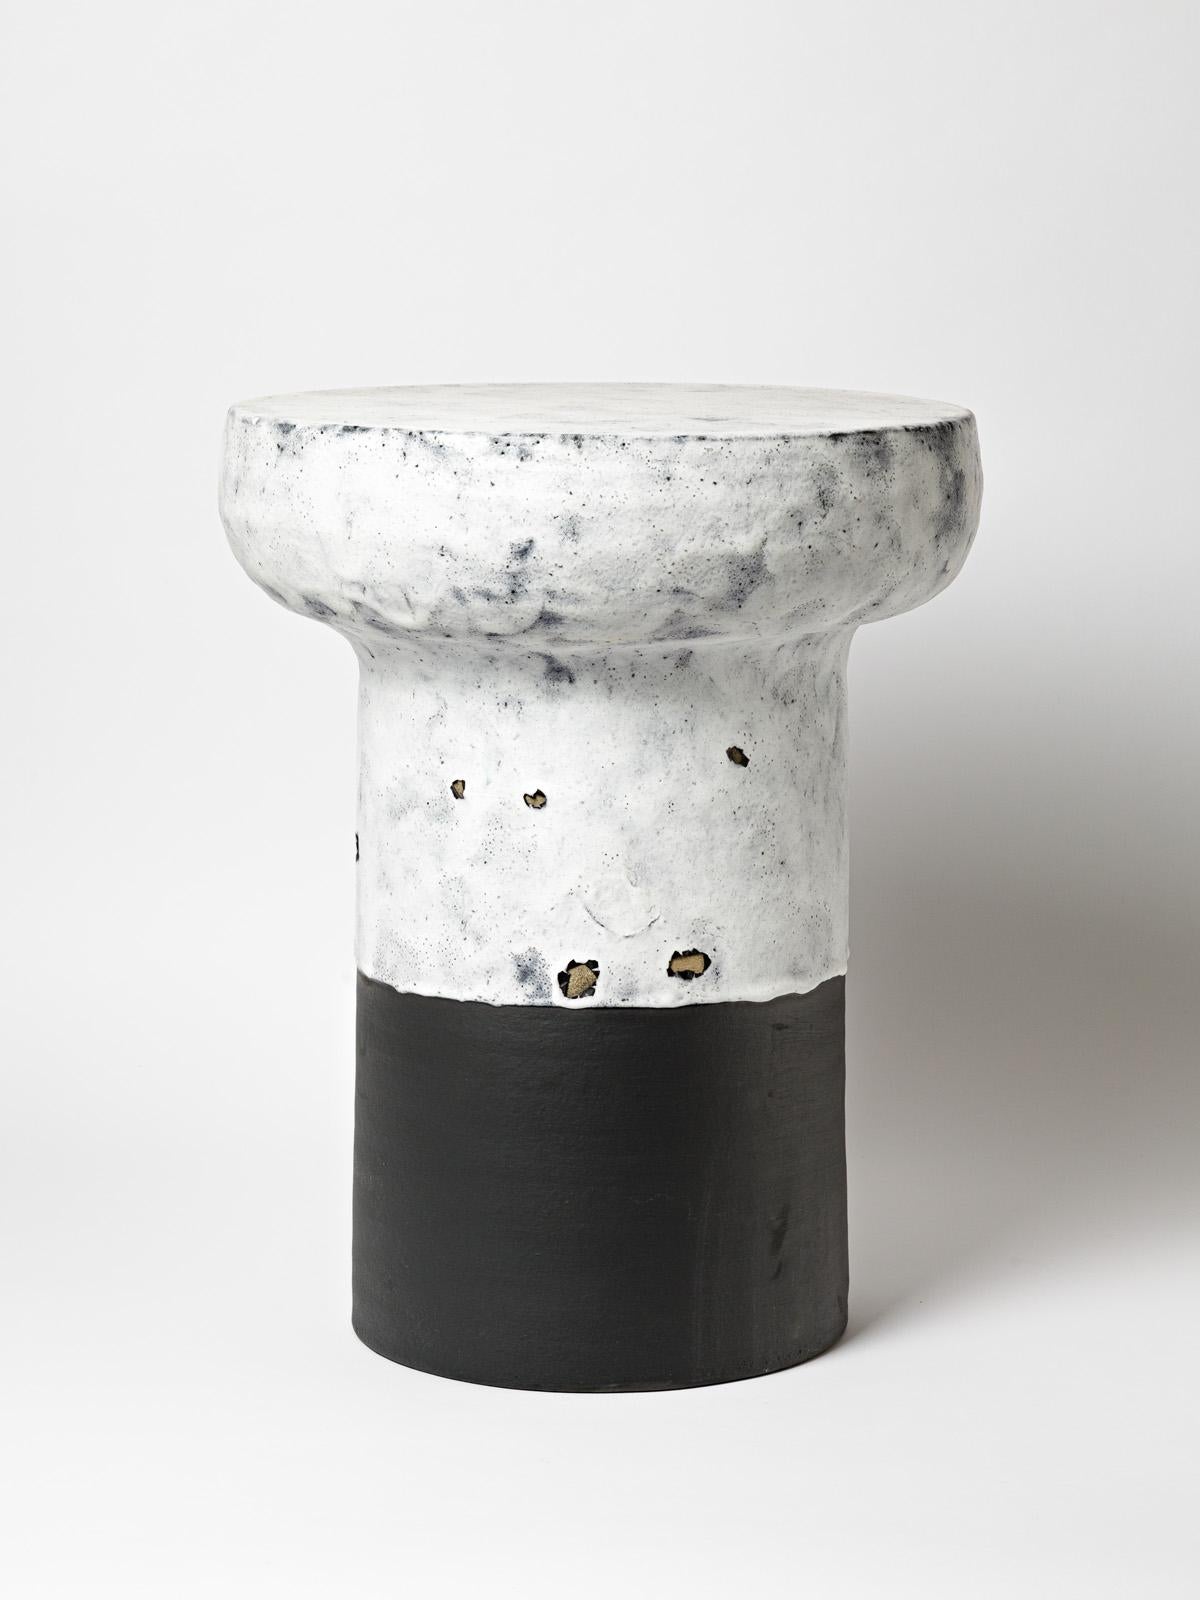 Beaux Arts Ceramic Stool or Table with Glazes Decoration by Mia Jensen, circa 2022